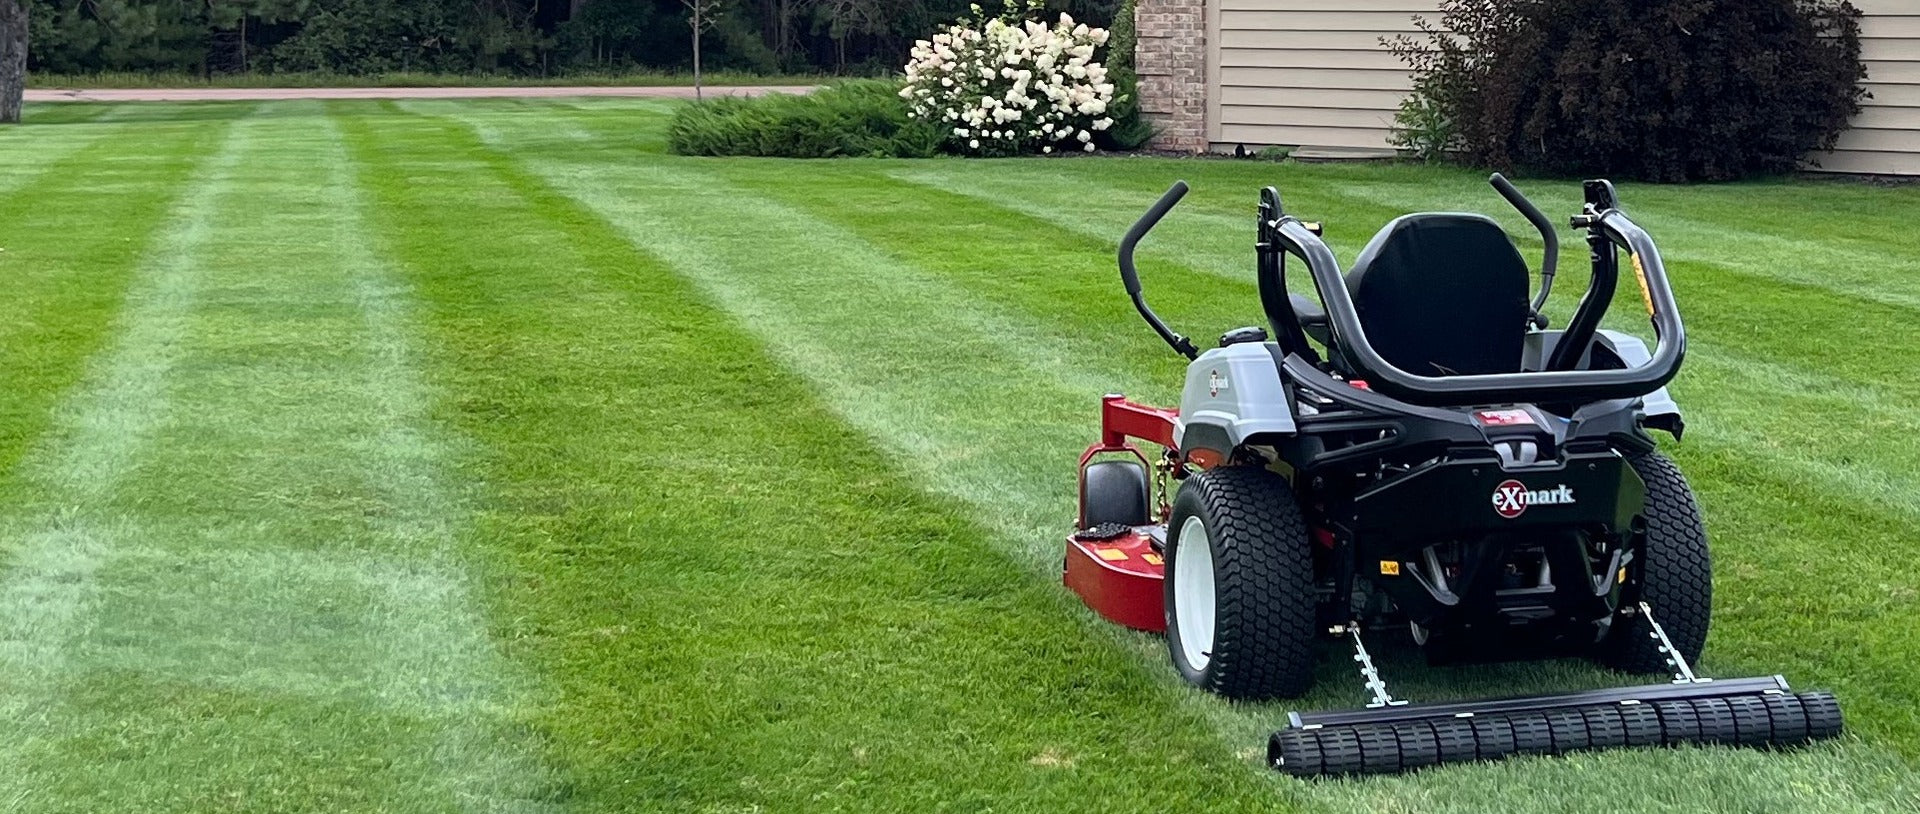 CheckMate Lawn Stripin Kit On EGO Mower